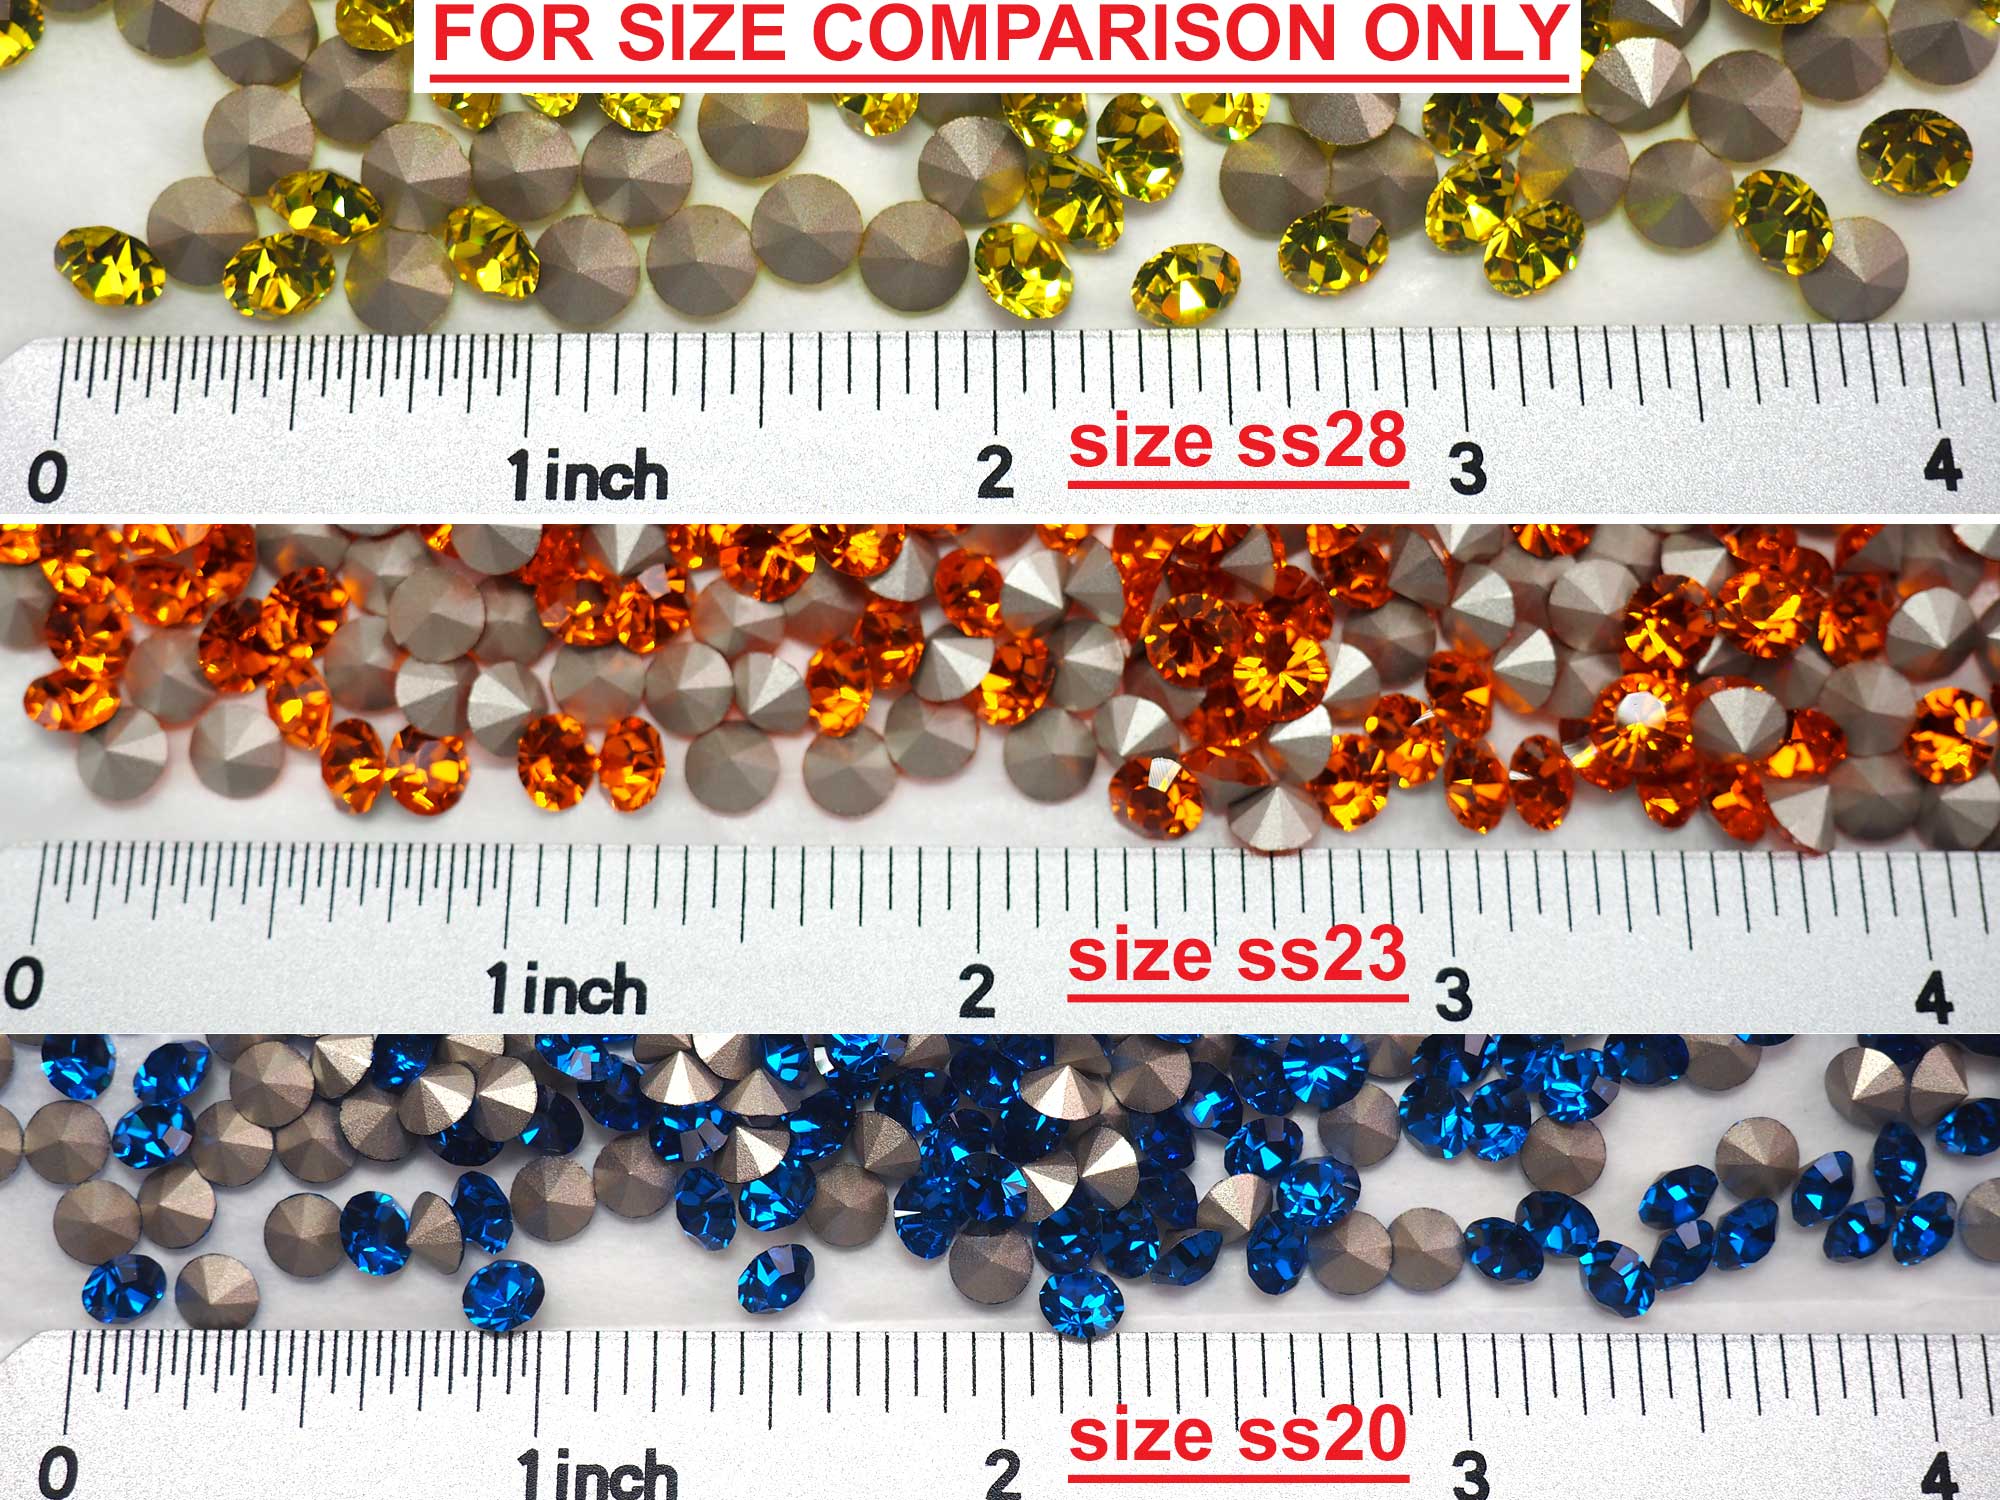 Topaz, Preciosa Genuine Czech MAXIMA Pointed Back Chatons in size ss28 (6mm, 0.24inch), 36 pieces, Silver Foiled, P636